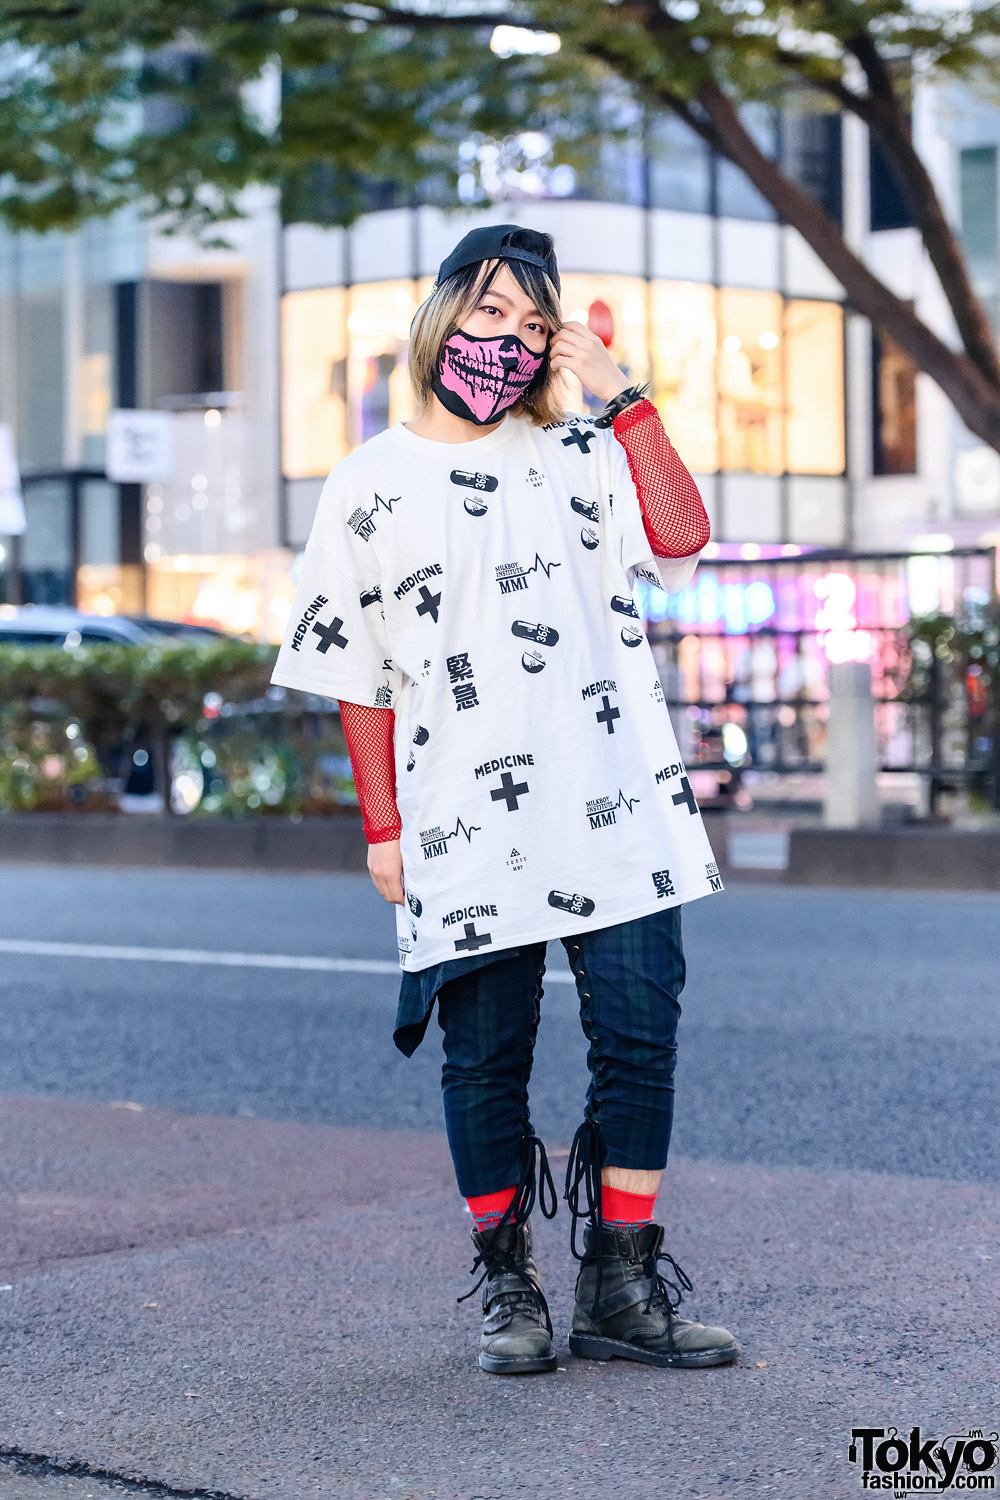 Milkboy Casual Tokyo Streetwear Style w/ Two-Tone Bob, Skull Mask, Fishnet Sleeves, Laced Plaid Pants & Dr. Martens Boots